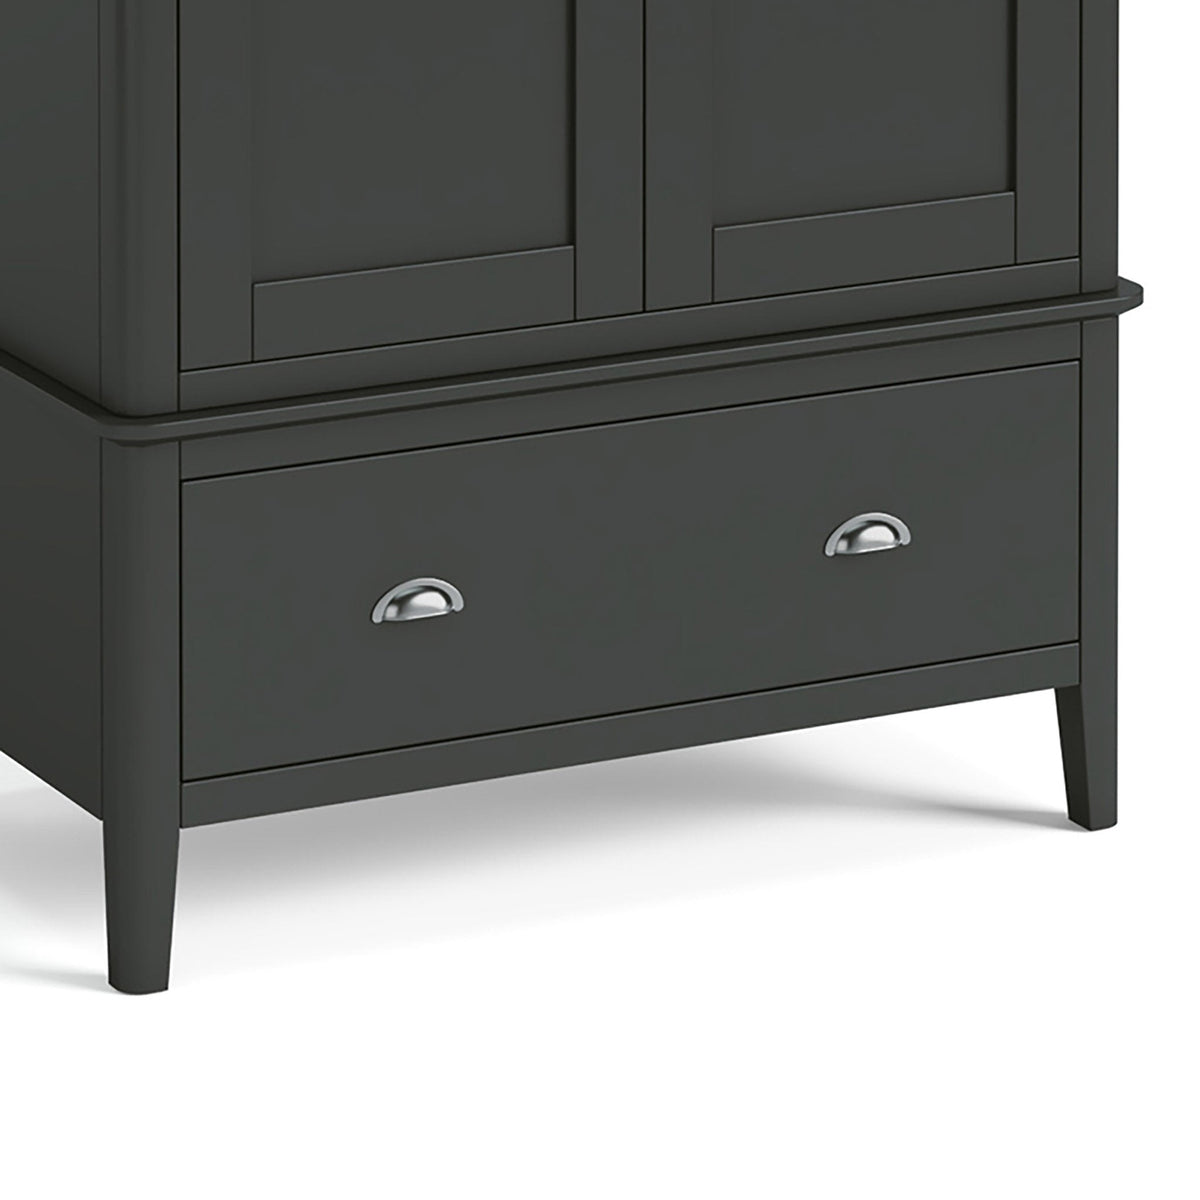 Dumbarton Charcoal Grey 2 Door Double Wardrobe with Drawer - Close up of lower storage drawer